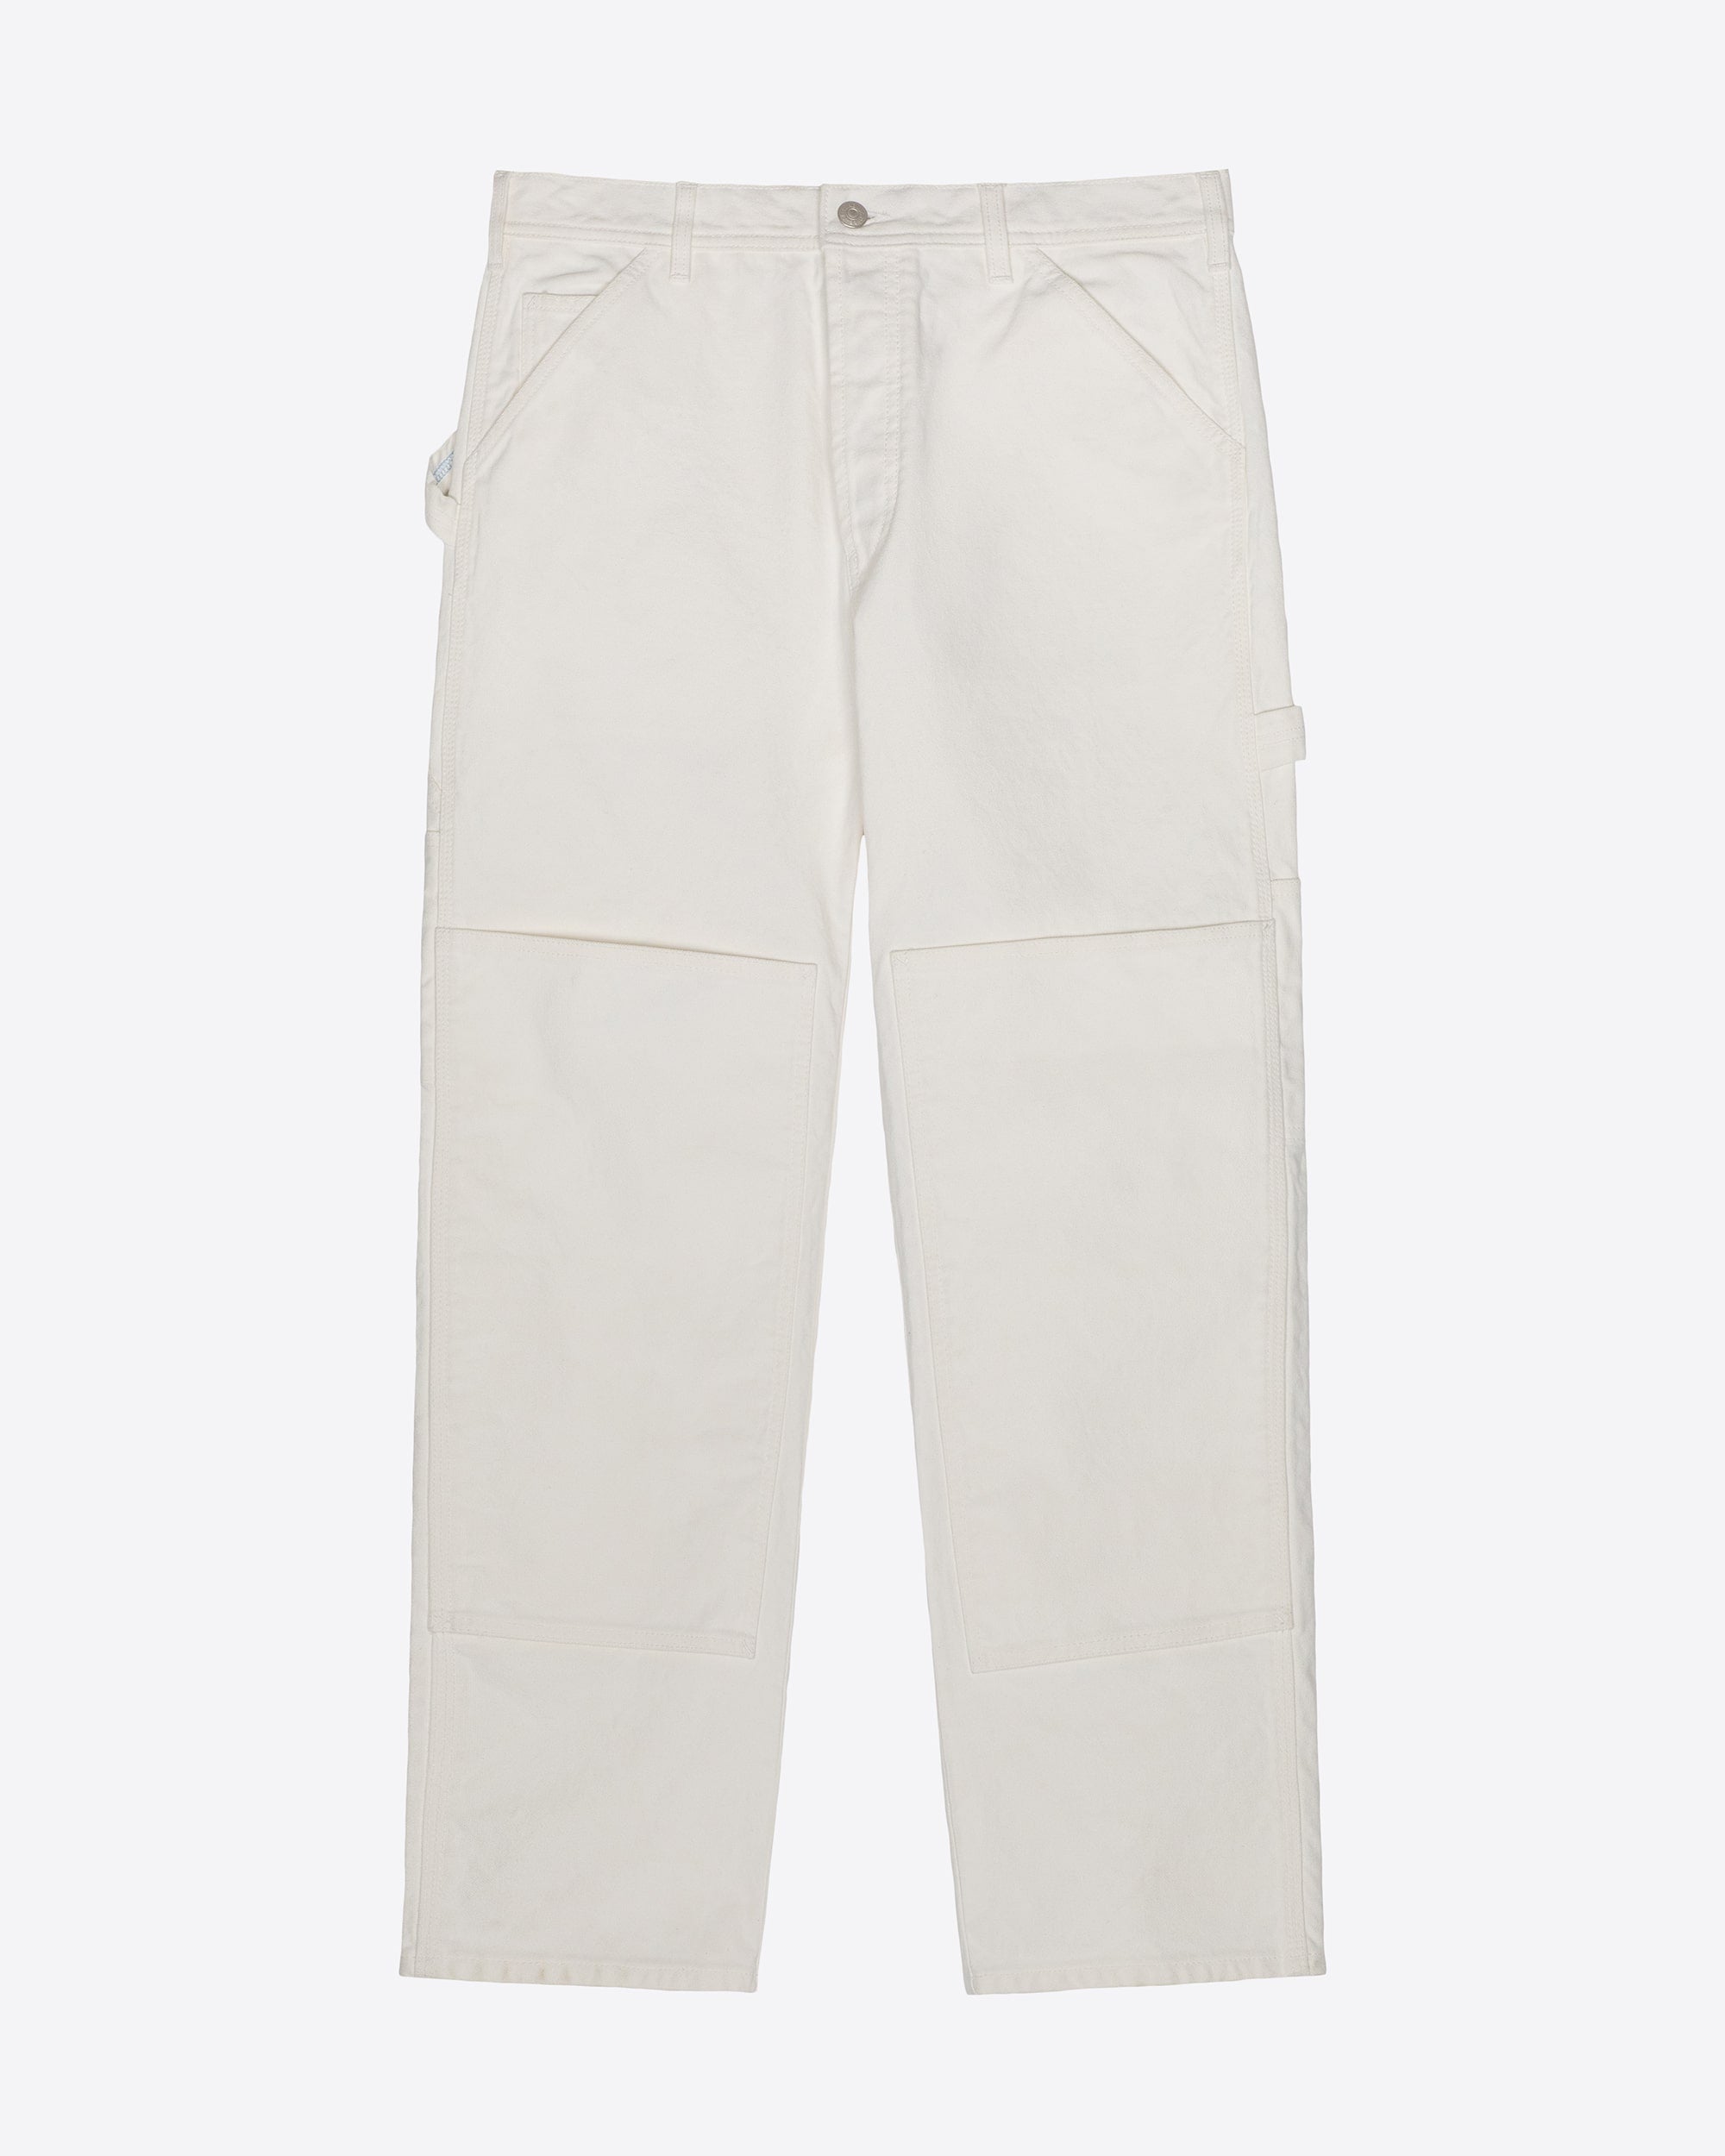 Workwear for painter, white work trousers